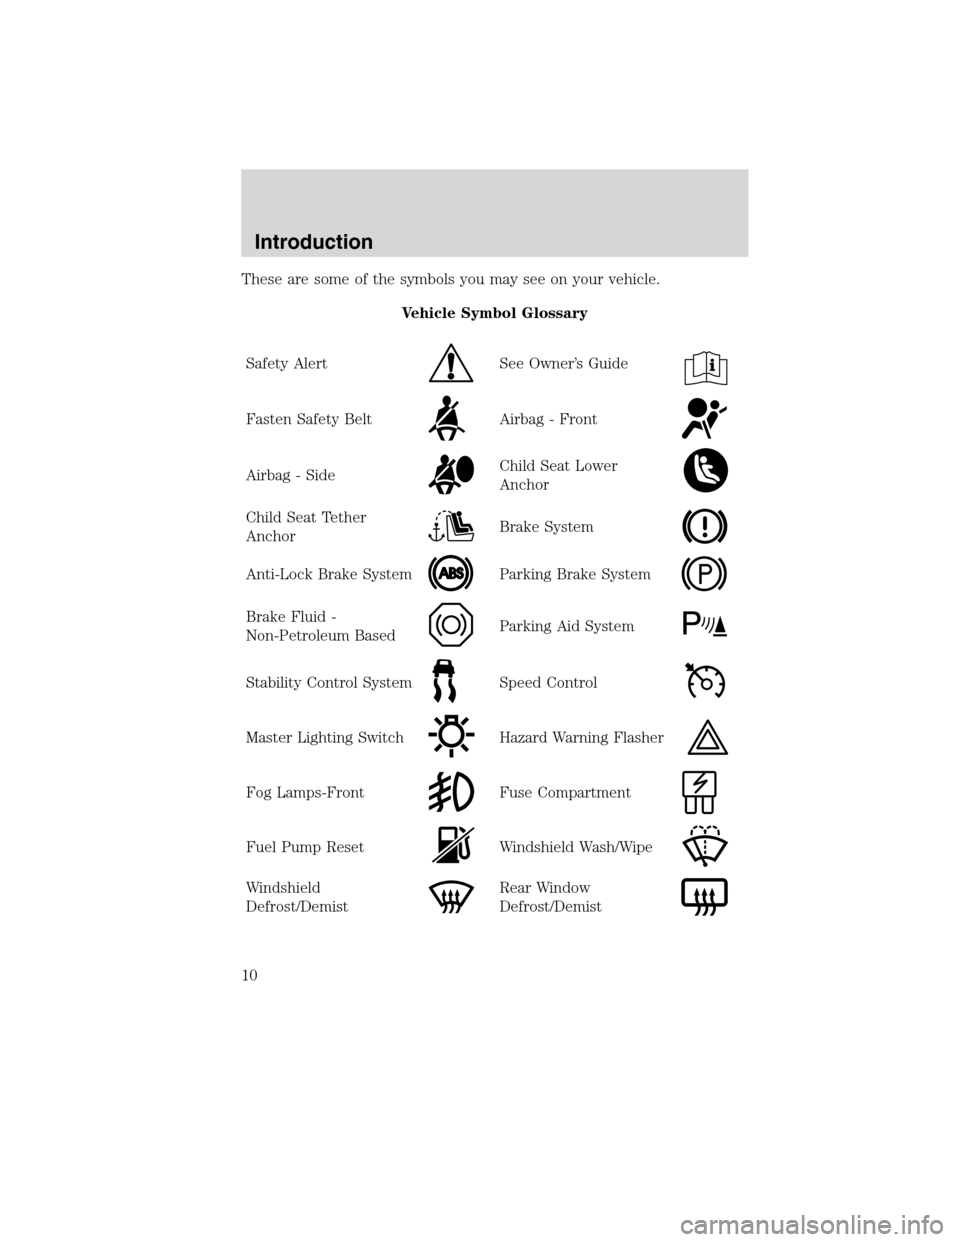 Mercury Milan 2010  Owners Manuals These are some of the symbols you may see on your vehicle.
Vehicle Symbol Glossary
Safety Alert
See Owner’s Guide
Fasten Safety BeltAirbag - Front
Airbag - SideChild Seat Lower
Anchor
Child Seat Tet